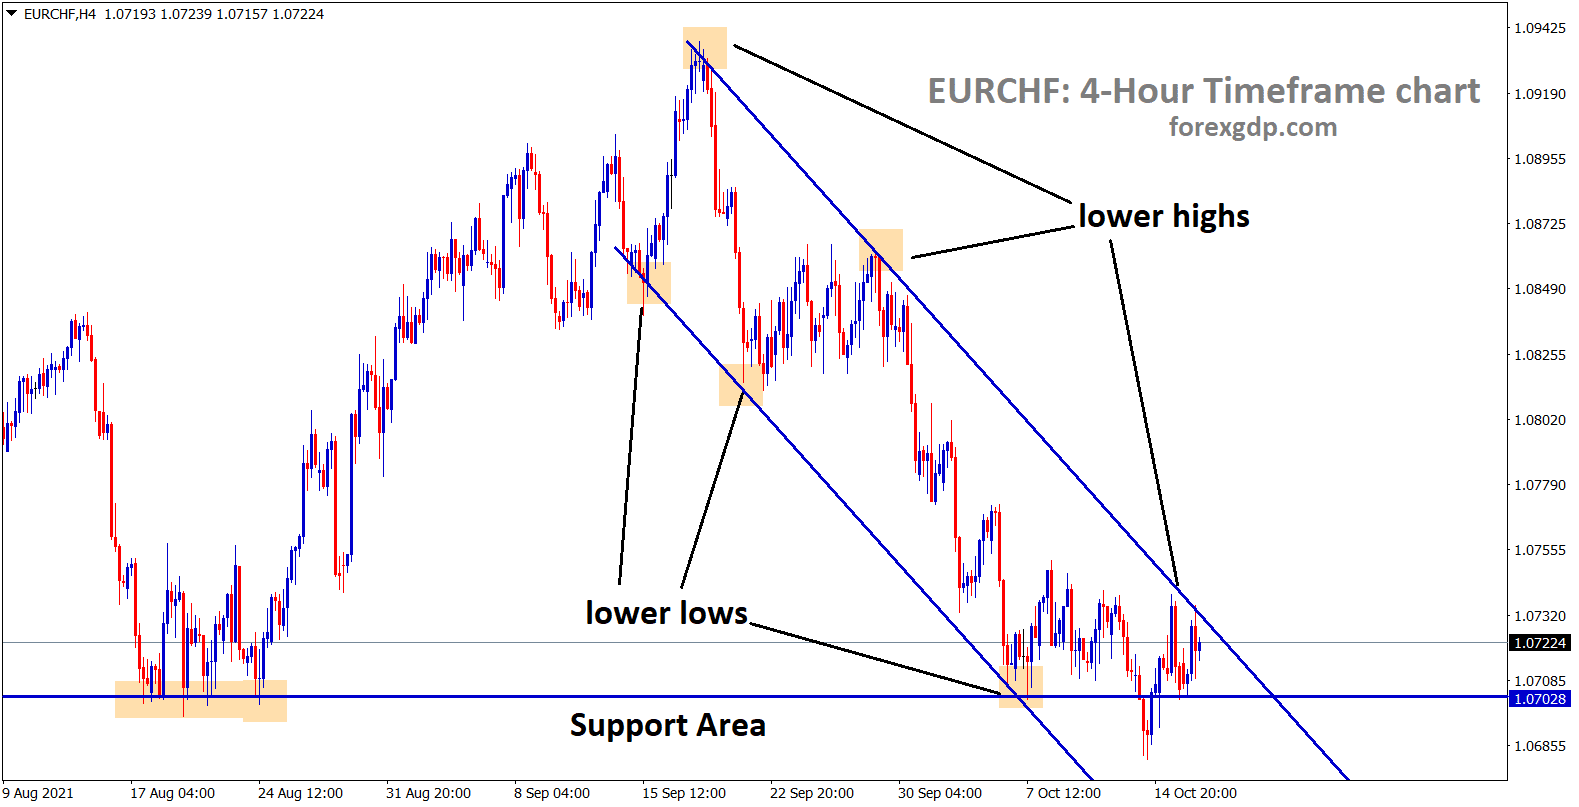 EURCHF is still moving in a descending channel range wait for the breakout. 1